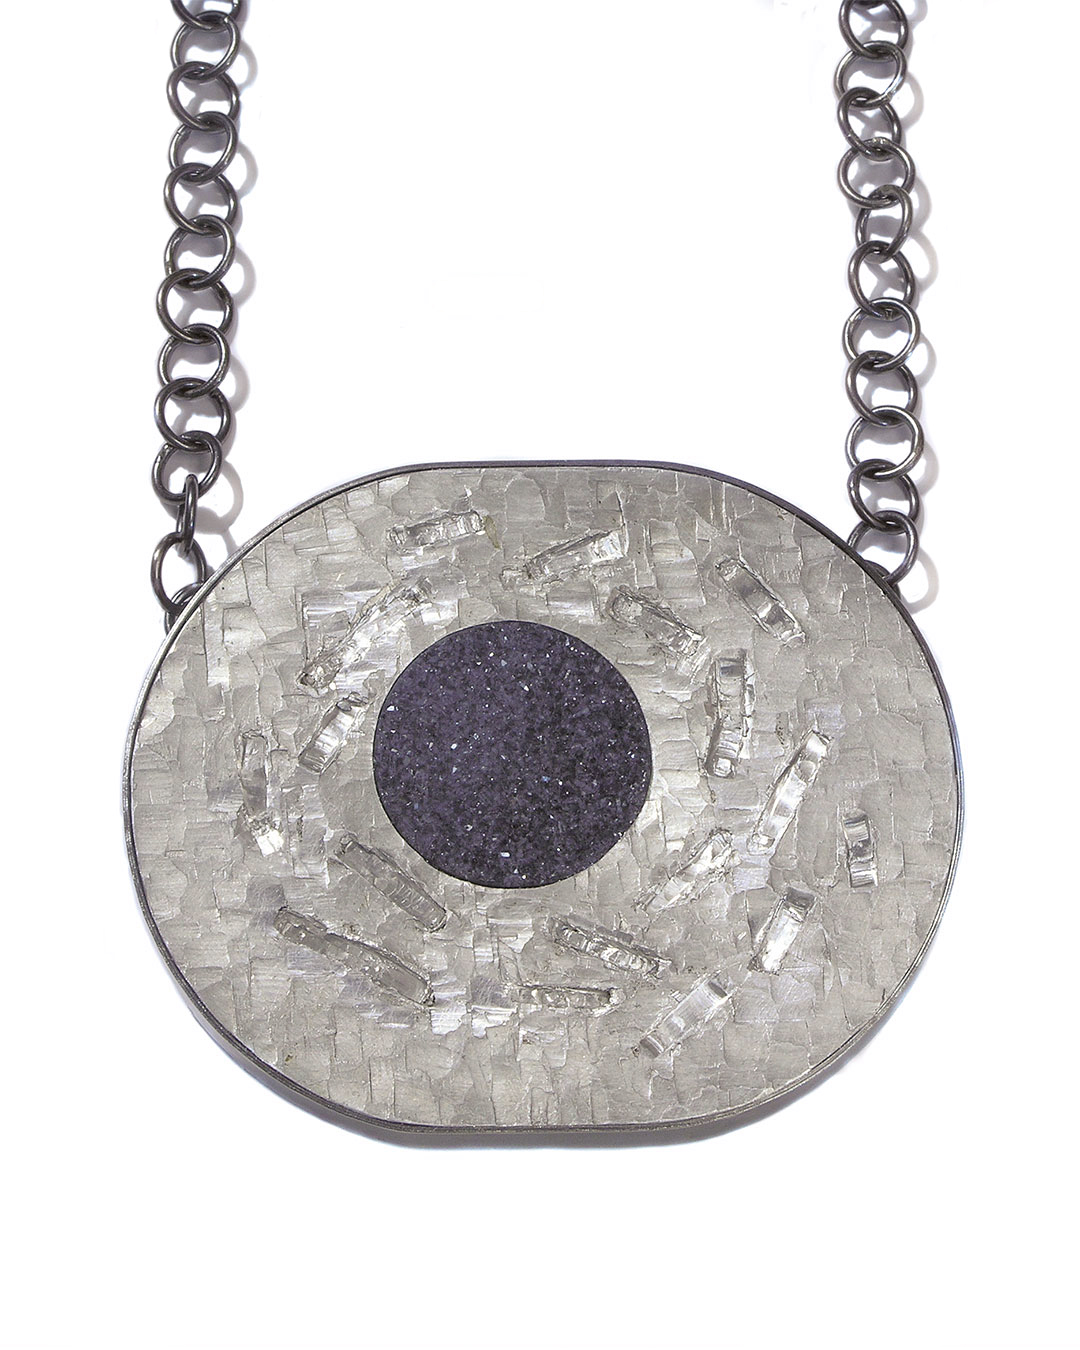 Sybille Richter, See (Lake), 2008, necklace; aluminium, 935 silver, agate, 70 x 60 x 7 mm, €880